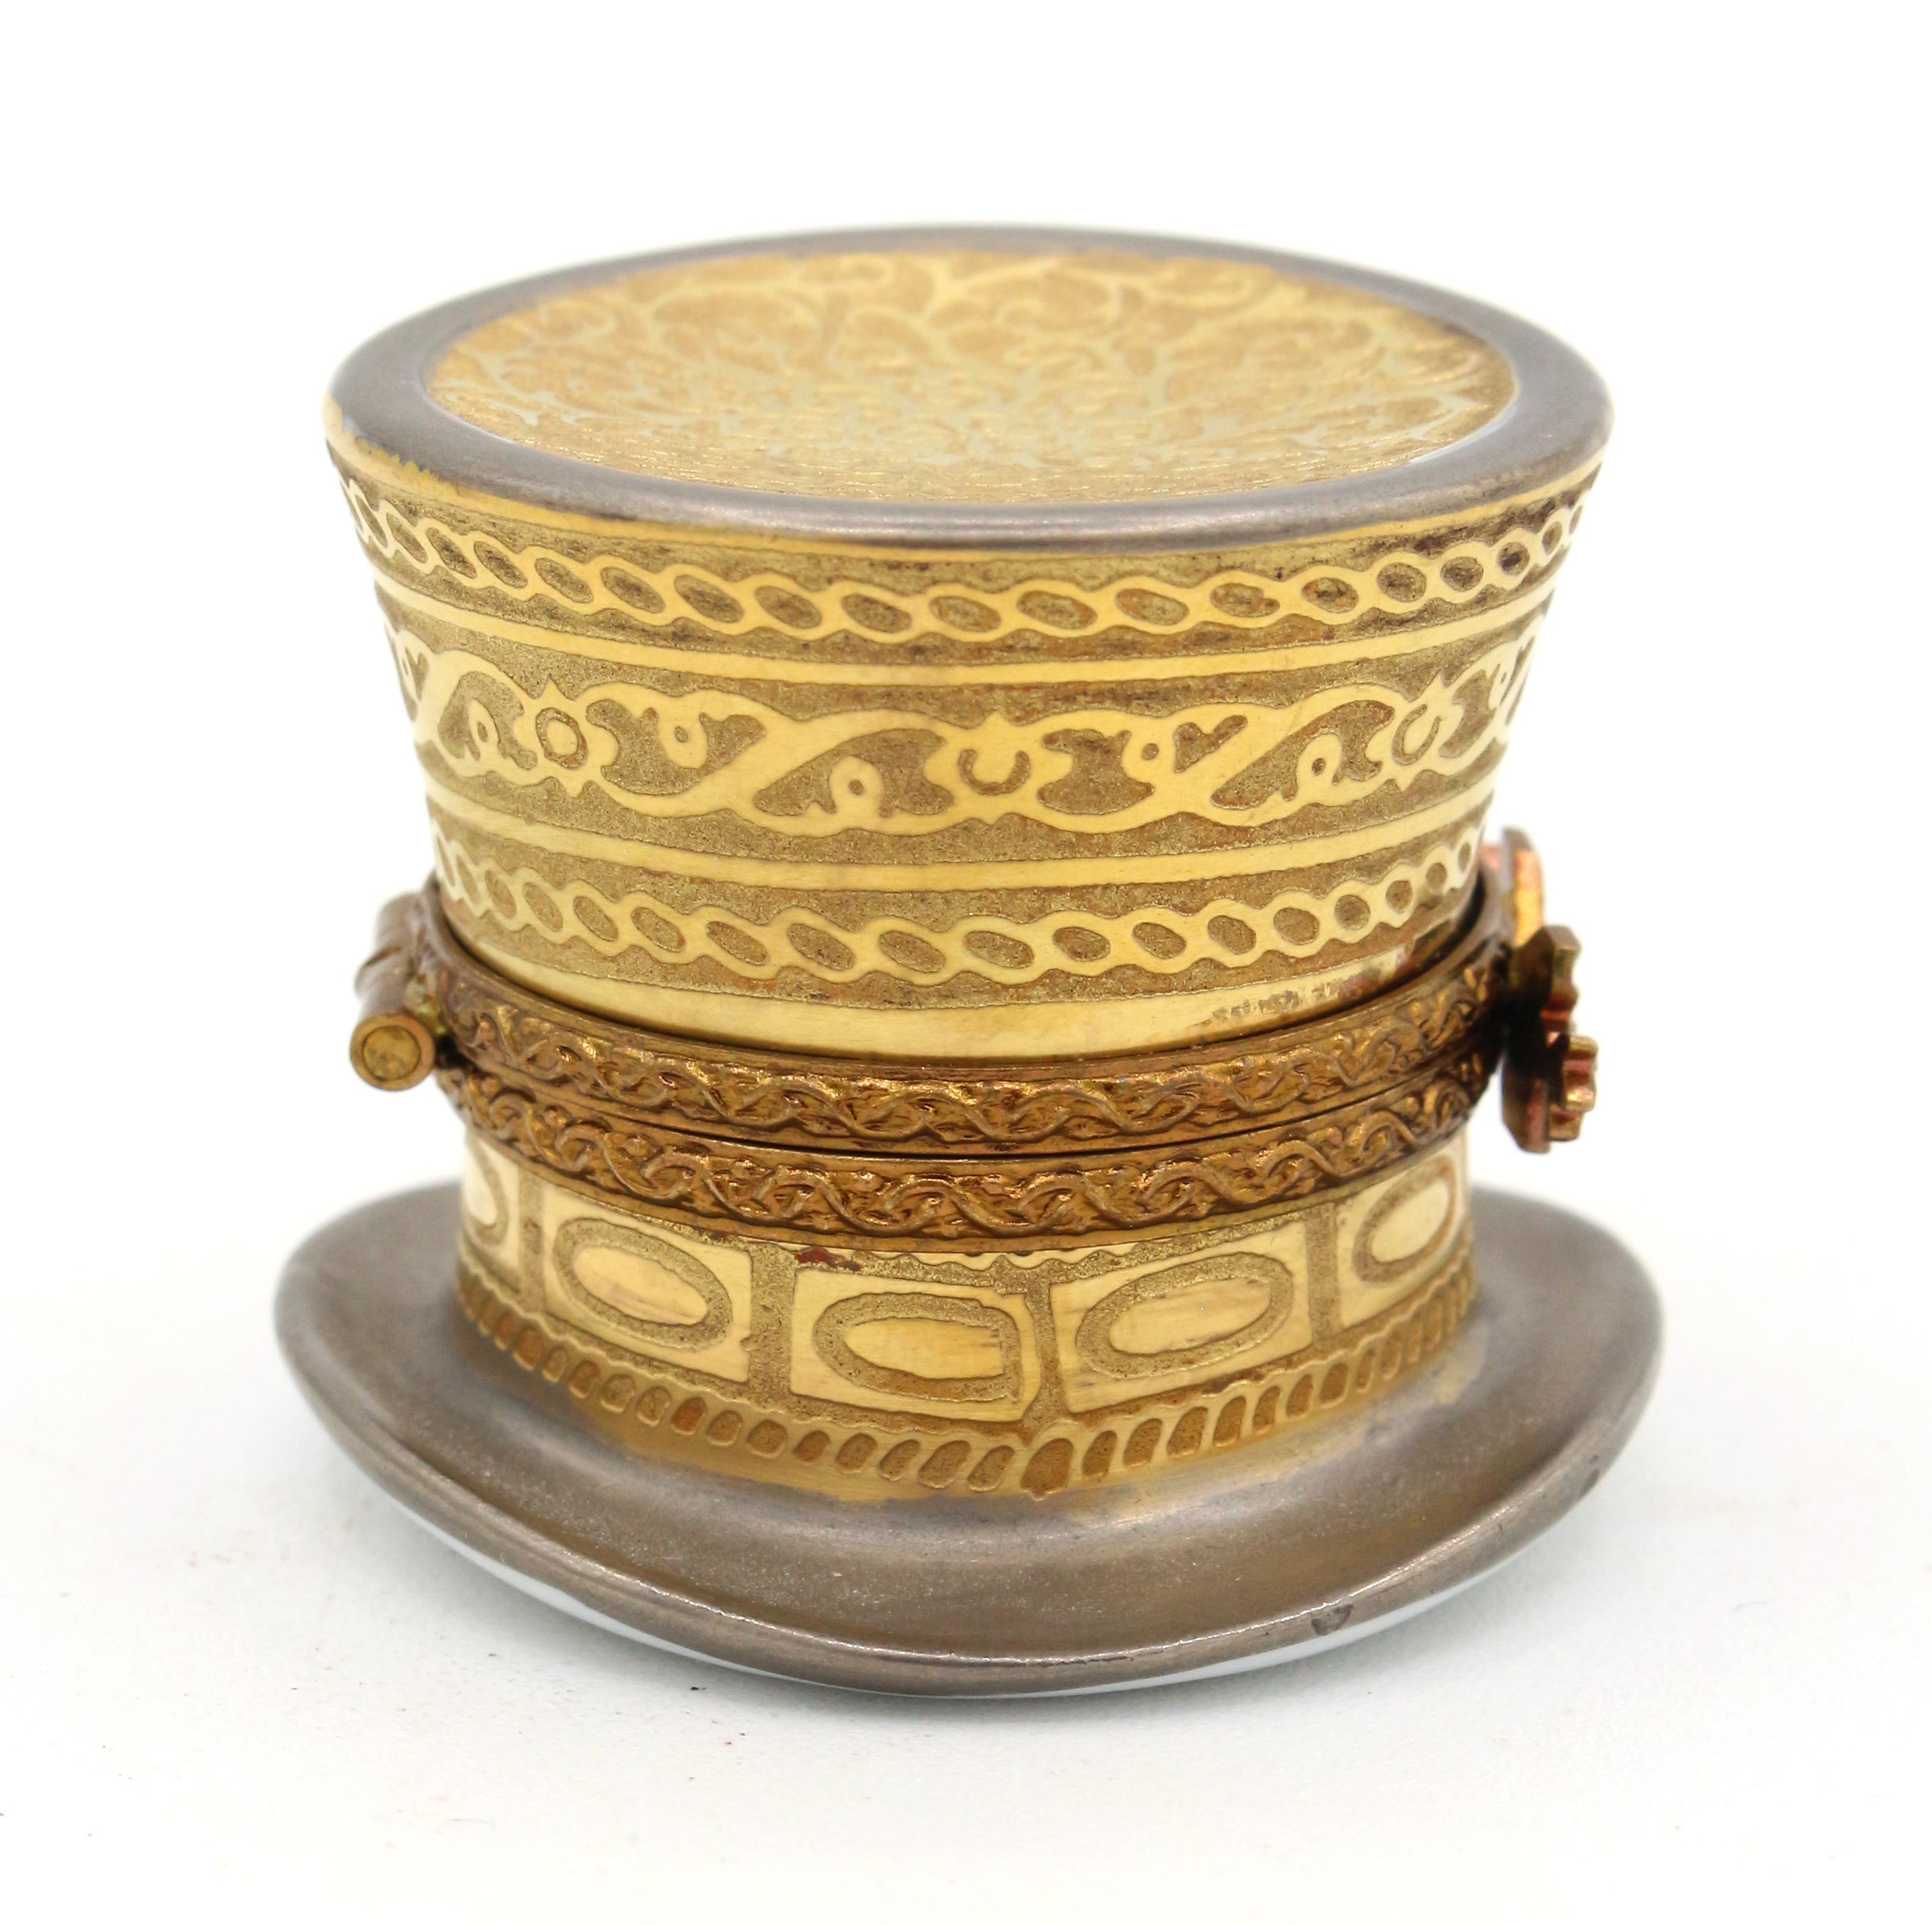 Limoges pill box in the form of a top hat, French later 20th century. Gilded & silvered with gilt mounts. Marked: Limoges France, Porcelaine D'Art Du Cruou, MCLS, Made in France.
1 5/8